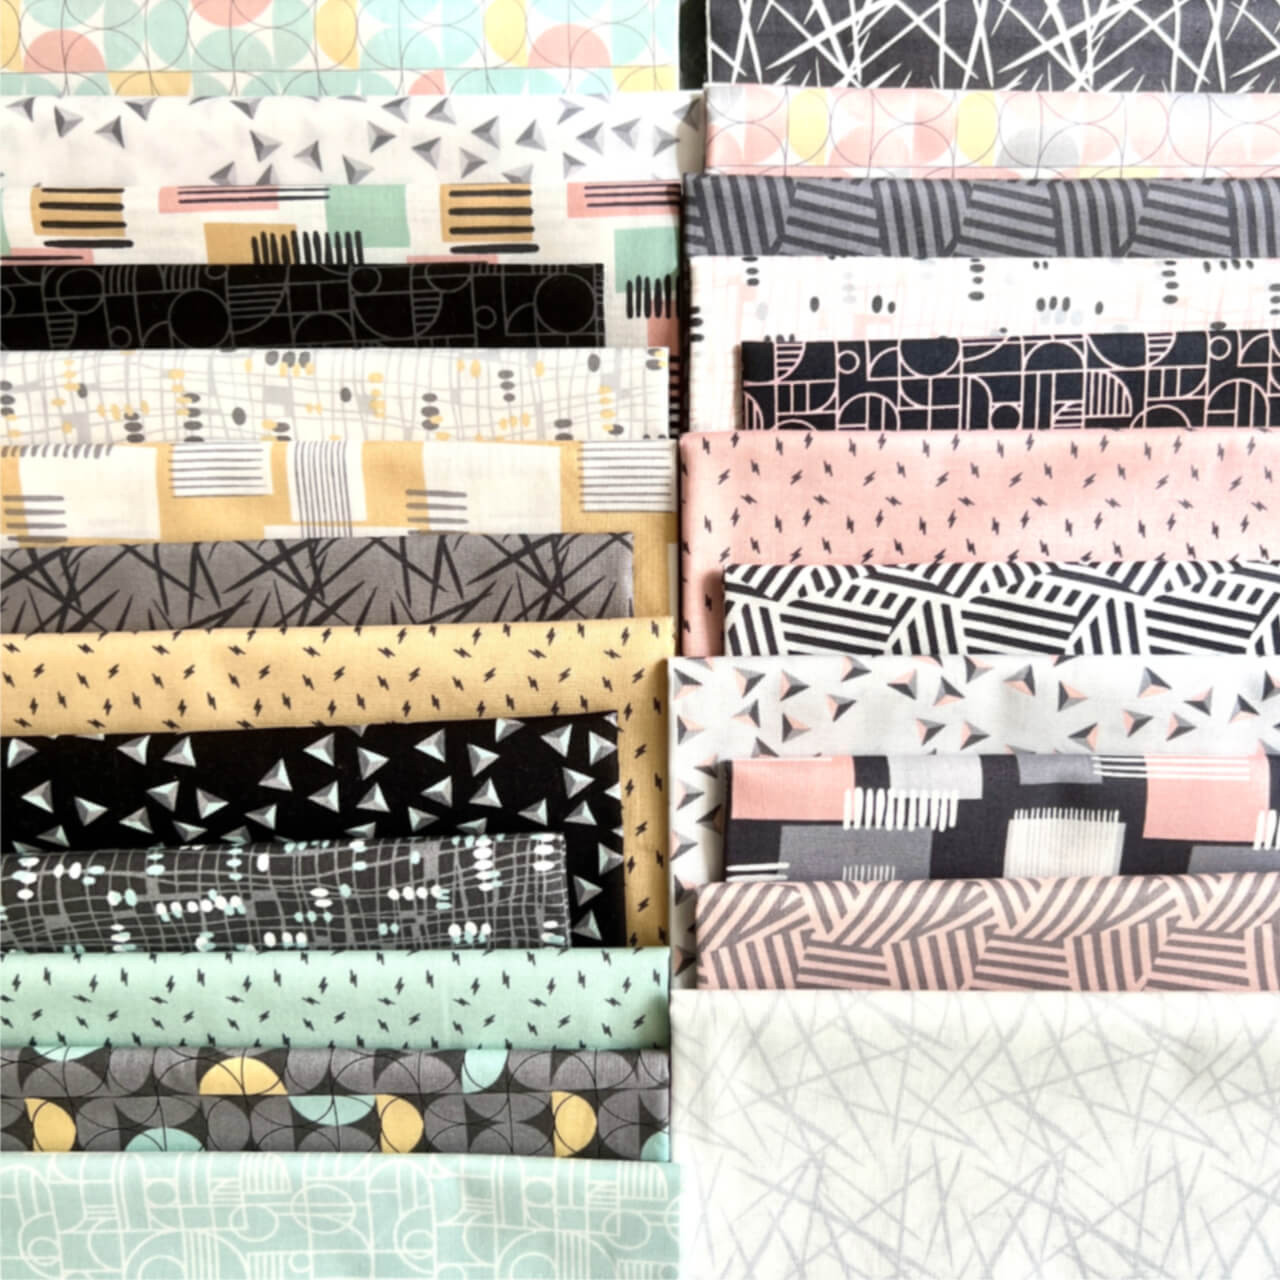 The image shows a collection of cascading fabric squares with geometric patterns in black, grey, mustard, mint, and pink. Bold shapes contrast with subtle designs, presenting a textured and varied assortment from the Rancho Relaxo series.